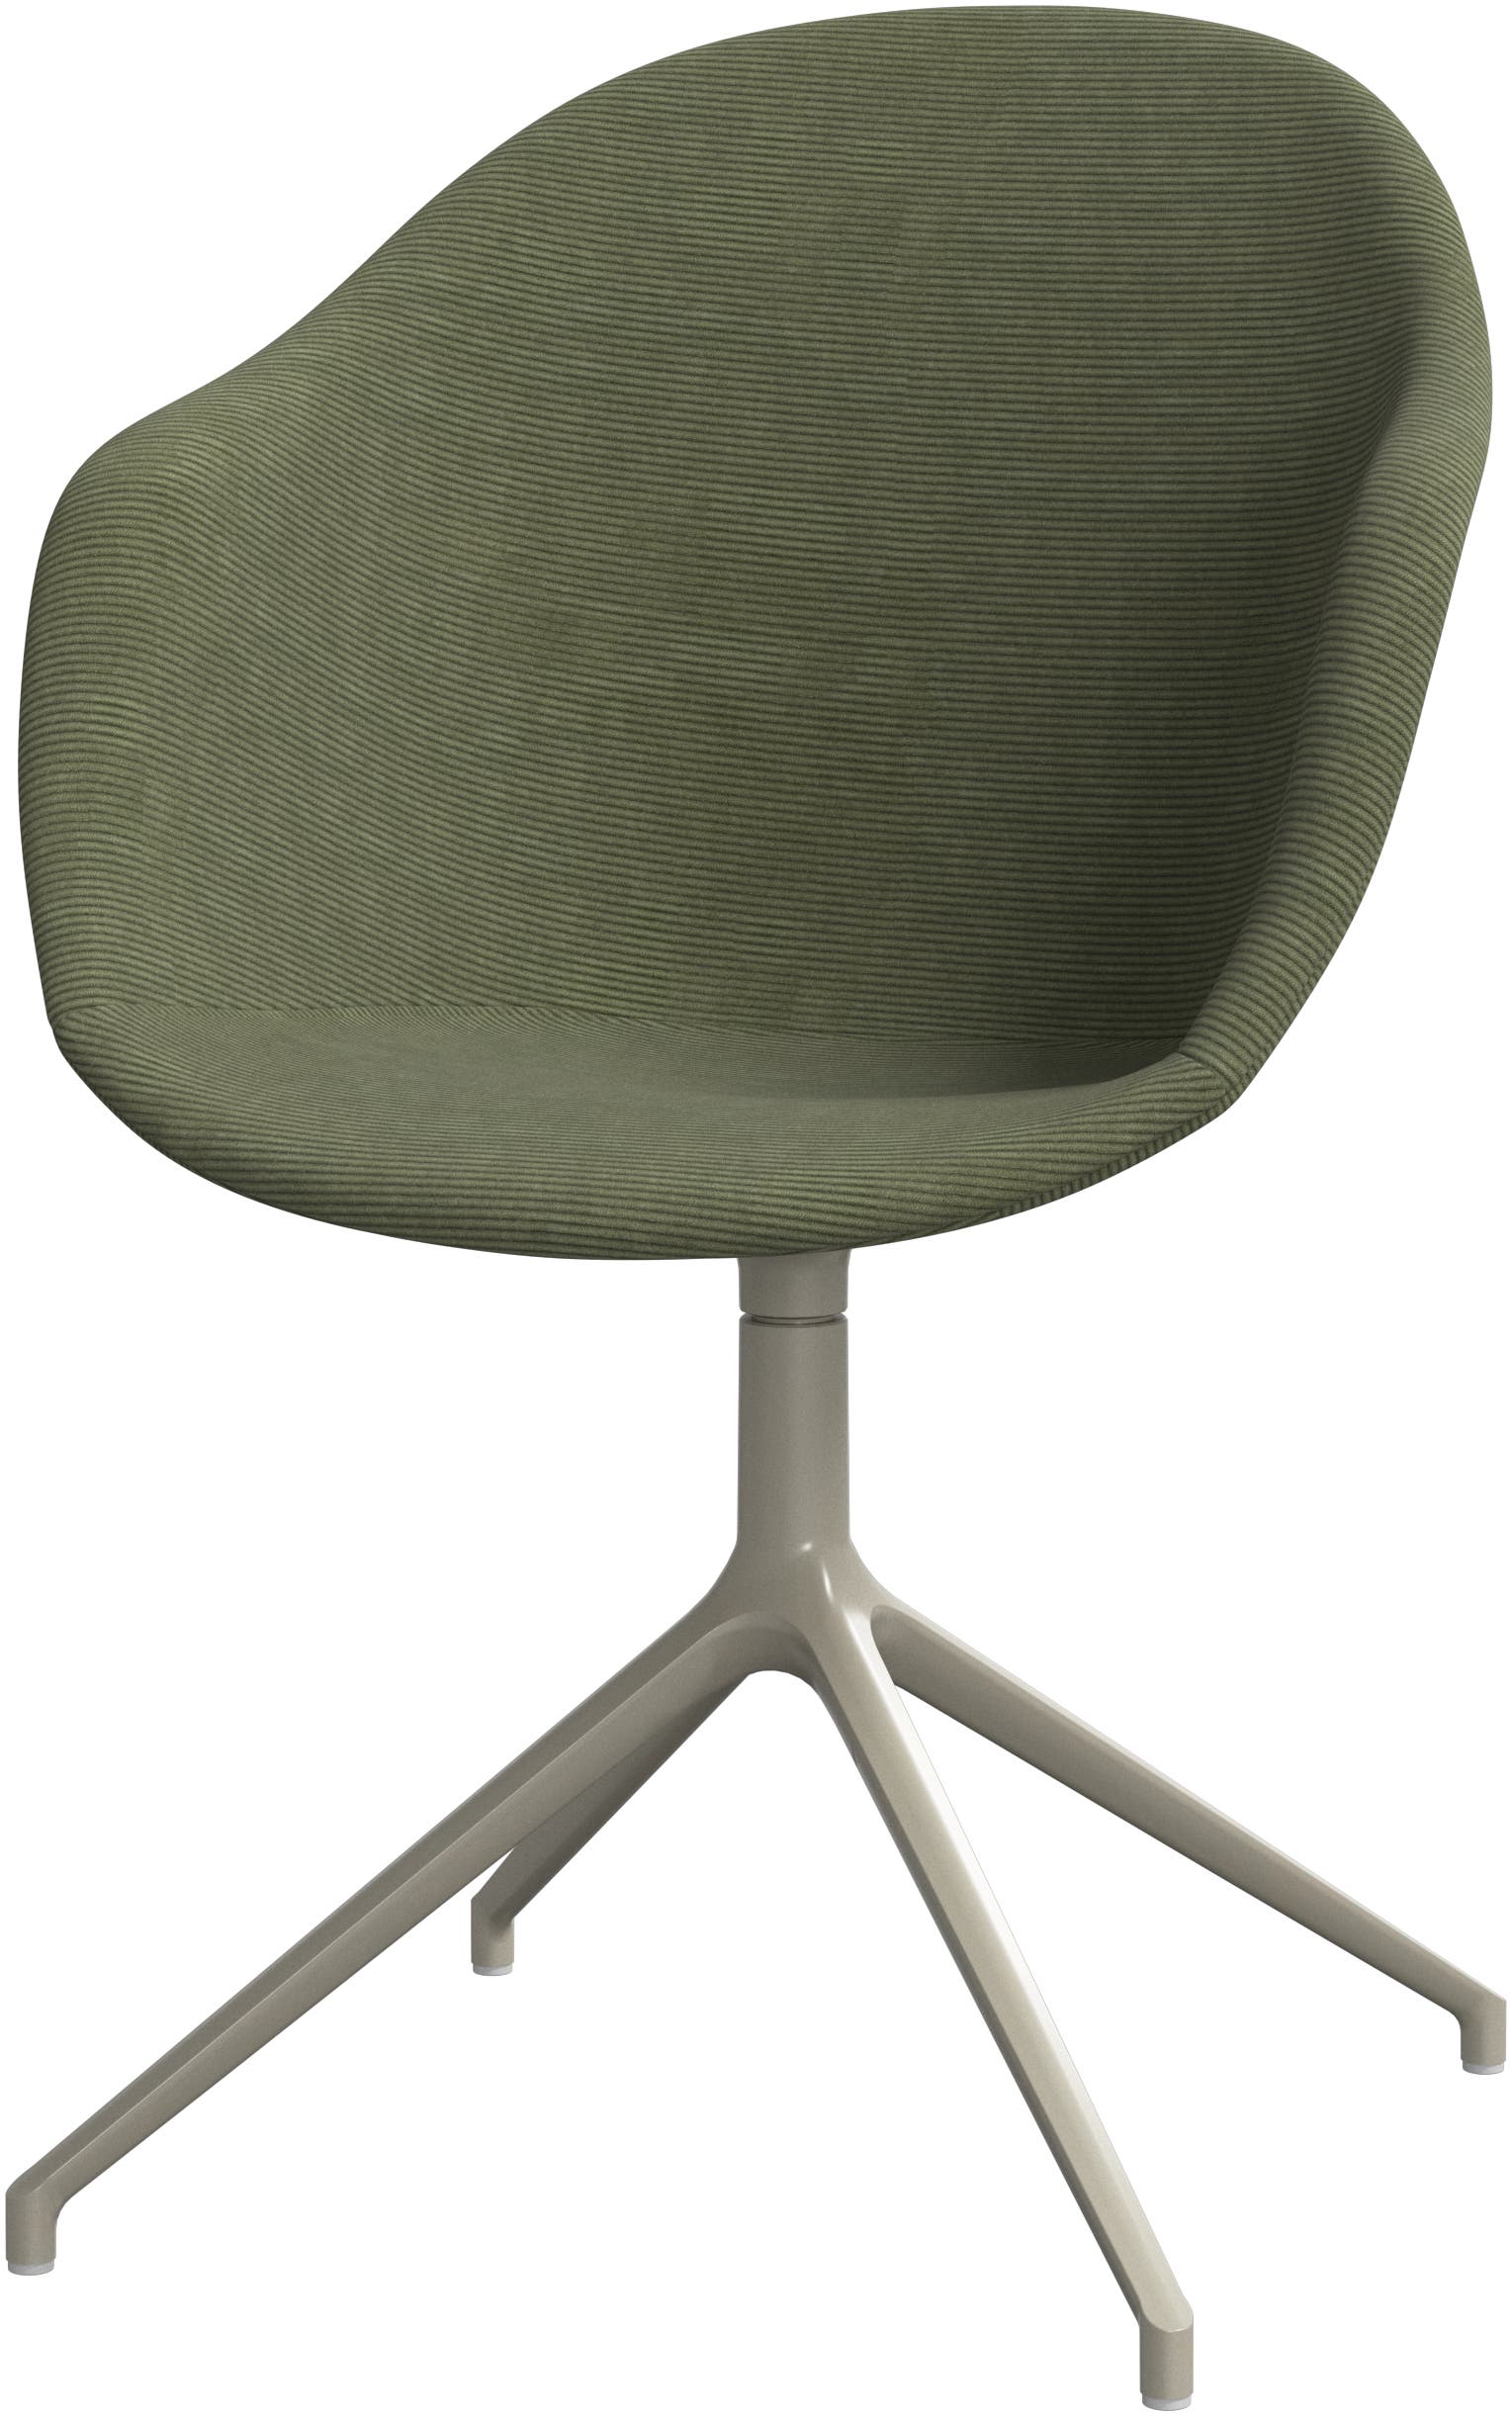 Adealaide Chair with Swivel Function x 2 [Priced as a set - 45% off]